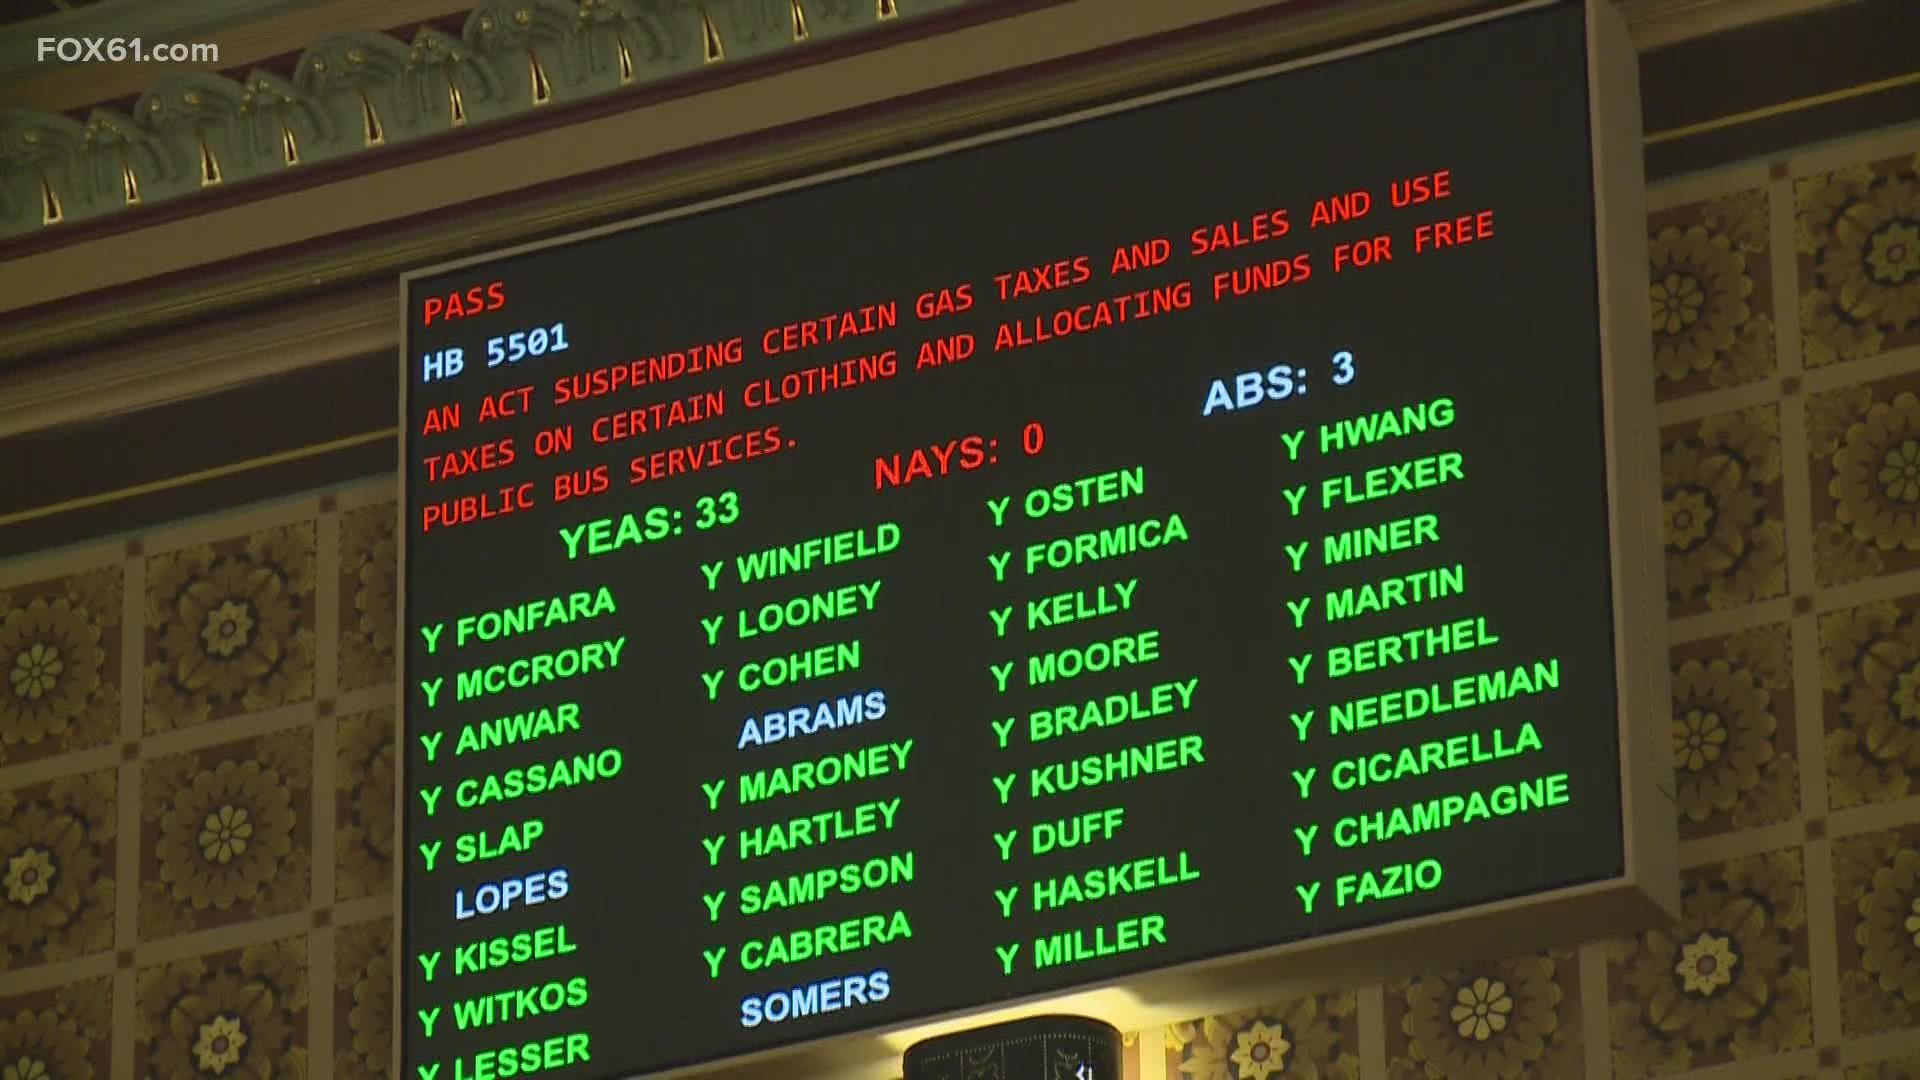 The Senate voted with no opposition, the bill now moves to Gov. Lamont for him to sign